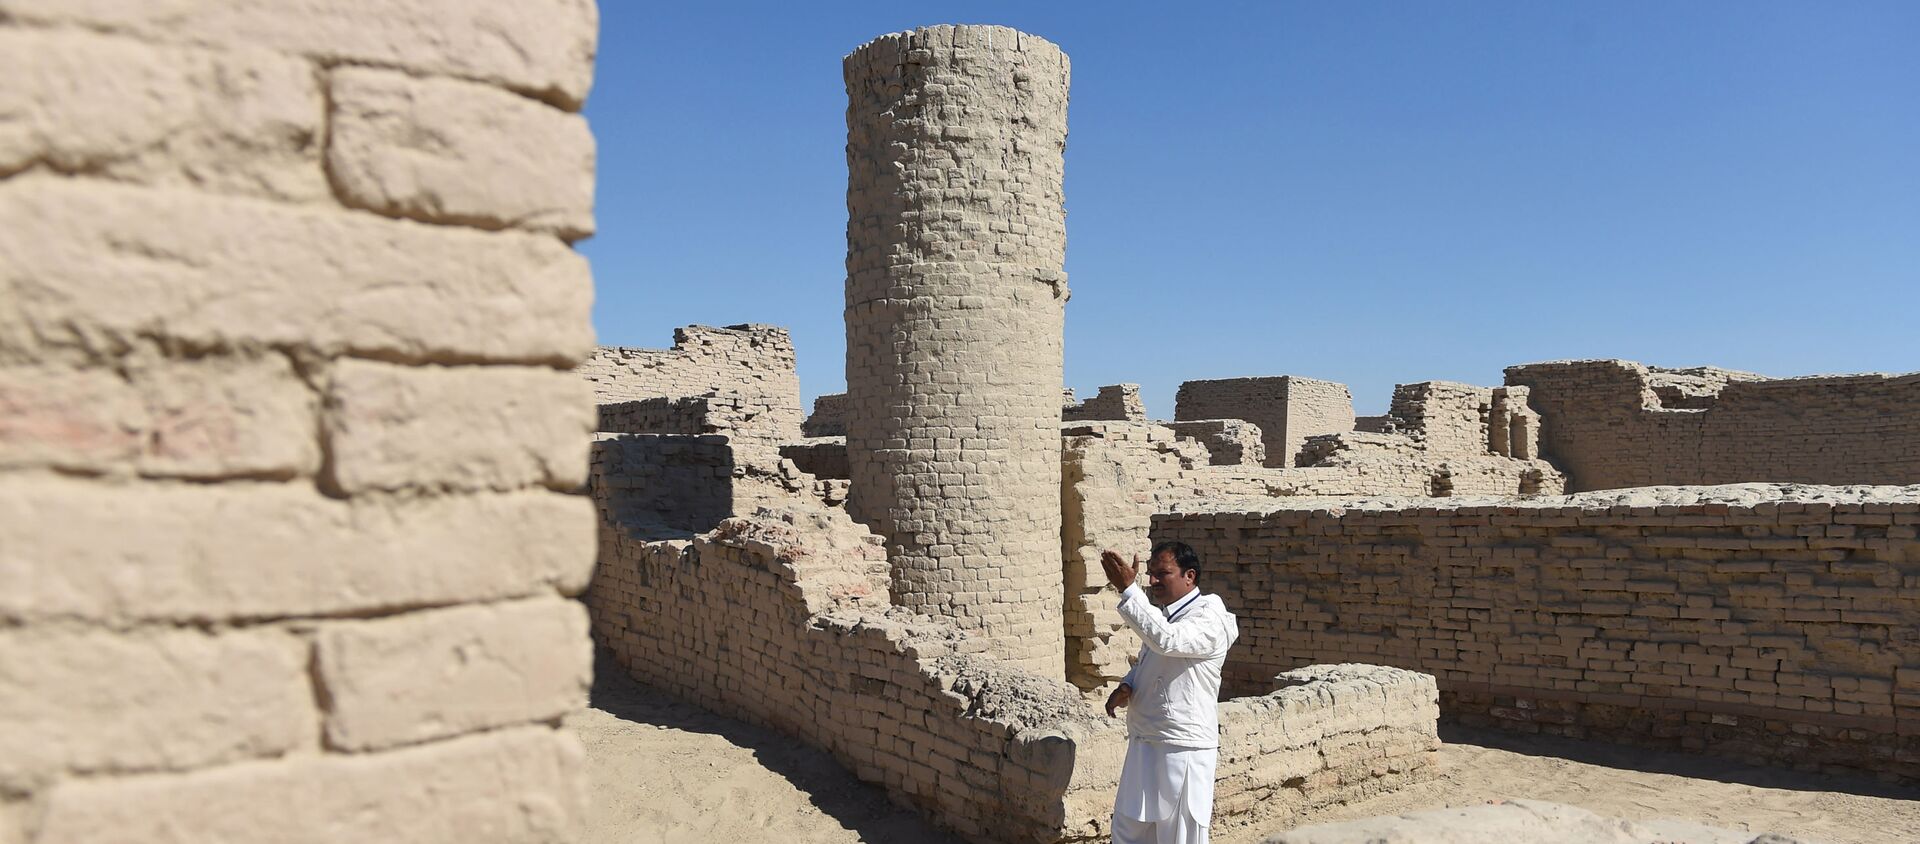 In this photograph taken on February 9, 2017, Pakistani caretaker at the UNESCO World Heritage archeological site of Mohenjo Daro, Ismail Mugheri, points out a two-story well at the site some 425 kms north of Karachi.  - Sputnik International, 1920, 05.09.2020